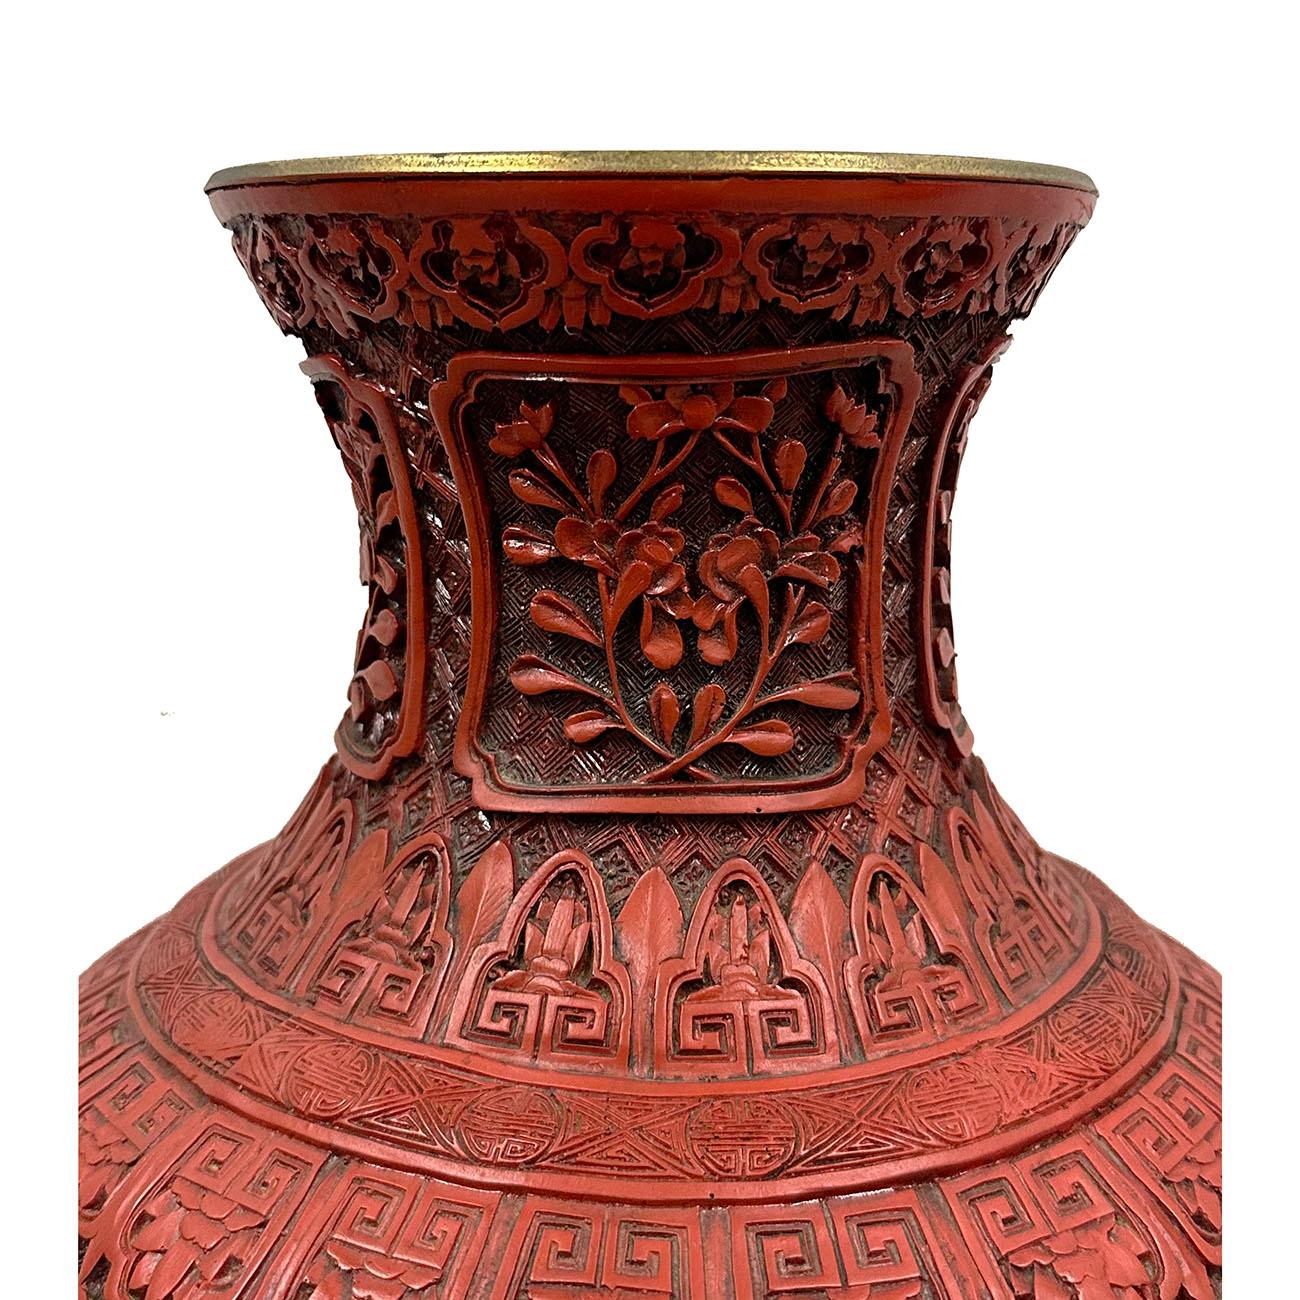 This vase was made during the Mid-20th Century in Beijing. It is very unique with intricate carving works of landscaping and characters.  The workmanship is superb. It is very rare that there is no too much similar vases in existence, probably